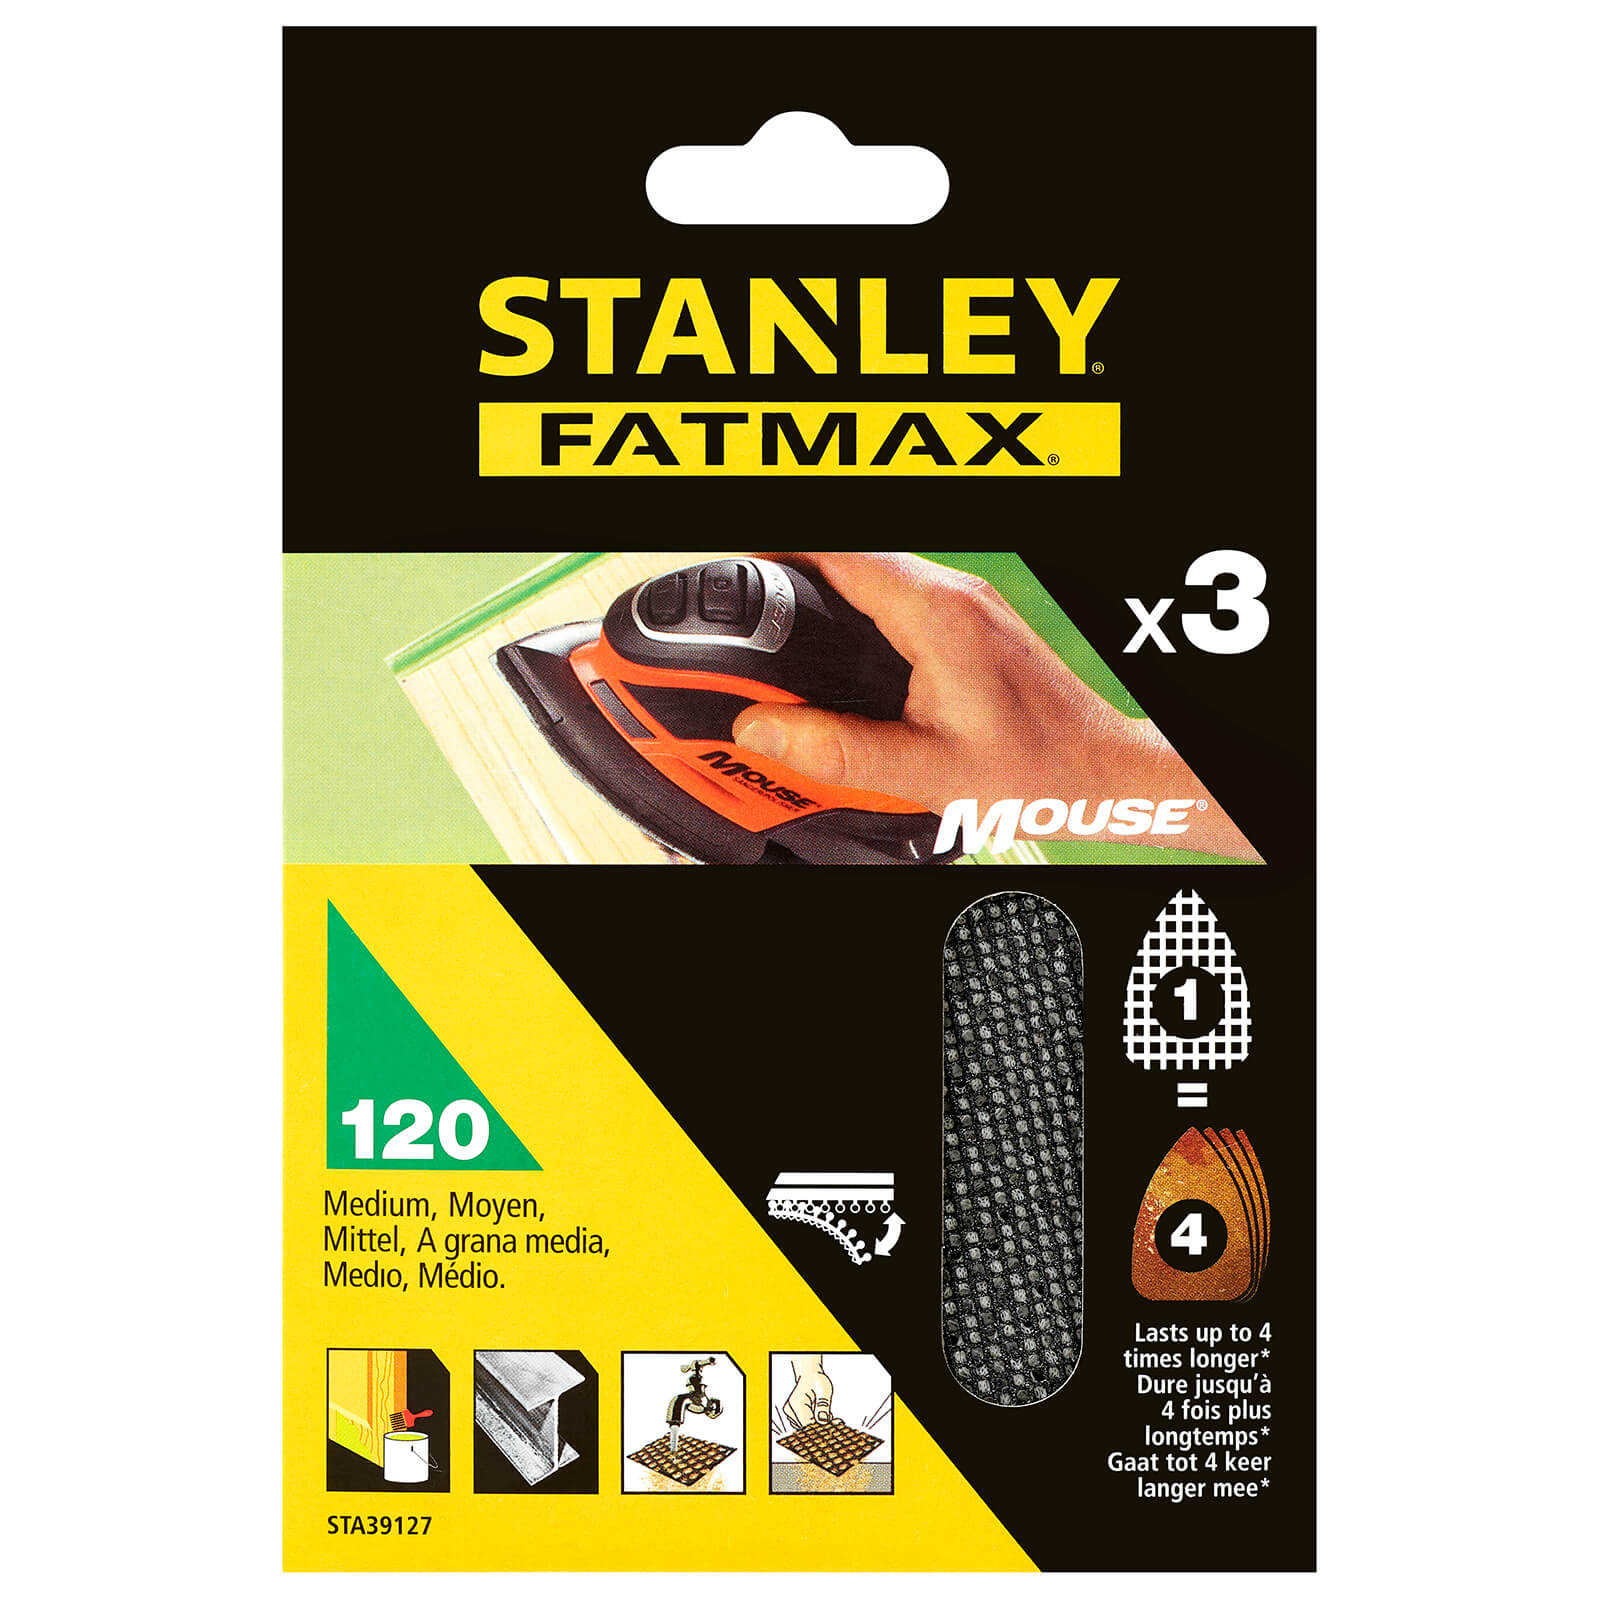 Photo of Stanley Fatmax - 3x 120g Mouse Mesh Sanding Sheets